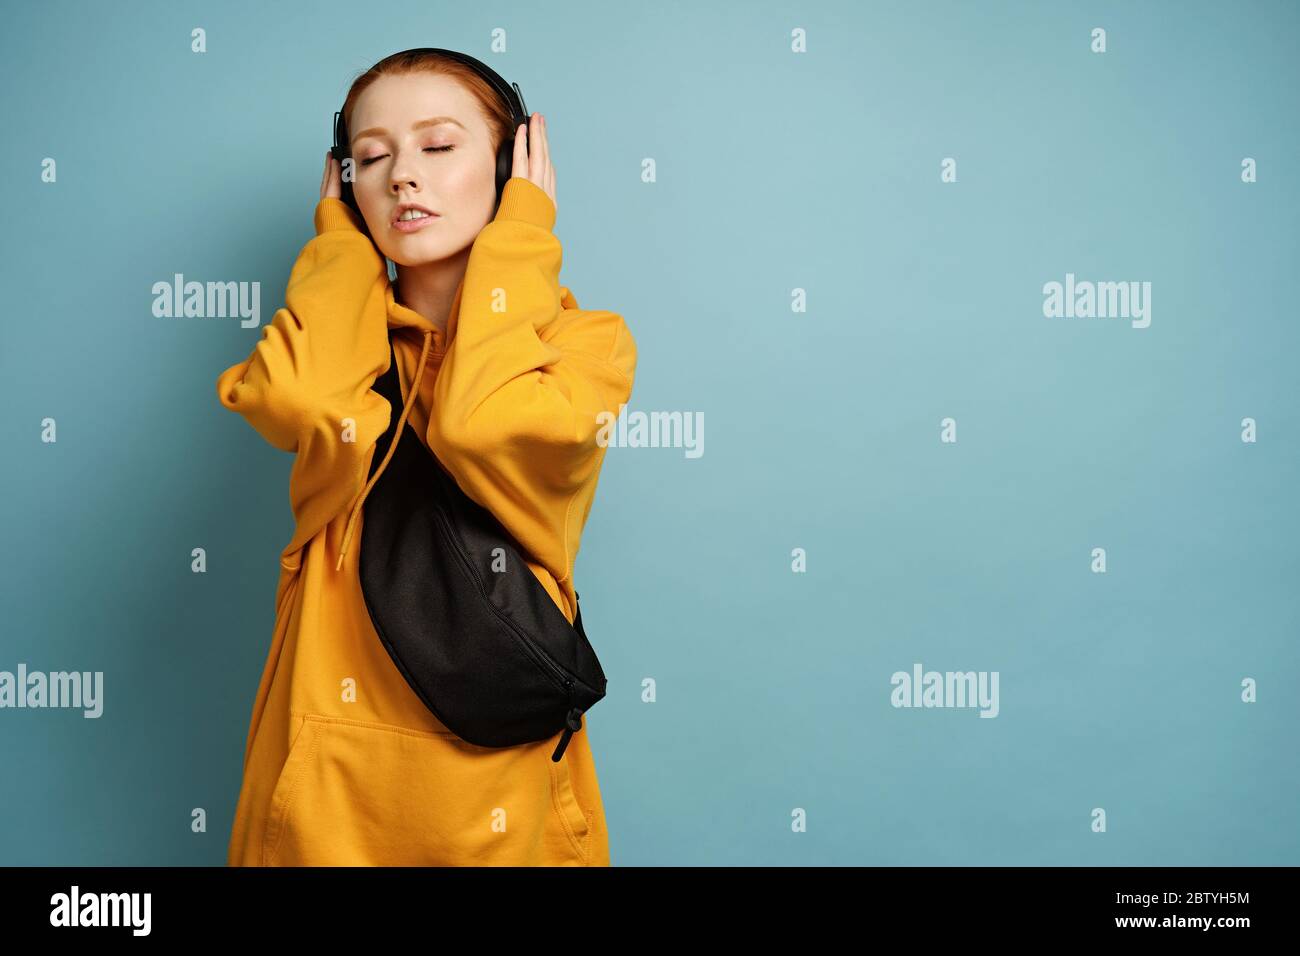 Red-haired girl in a yellow sweatshirt stands on a blue background, closing her eyes and holding her hands on headphones Stock Photo